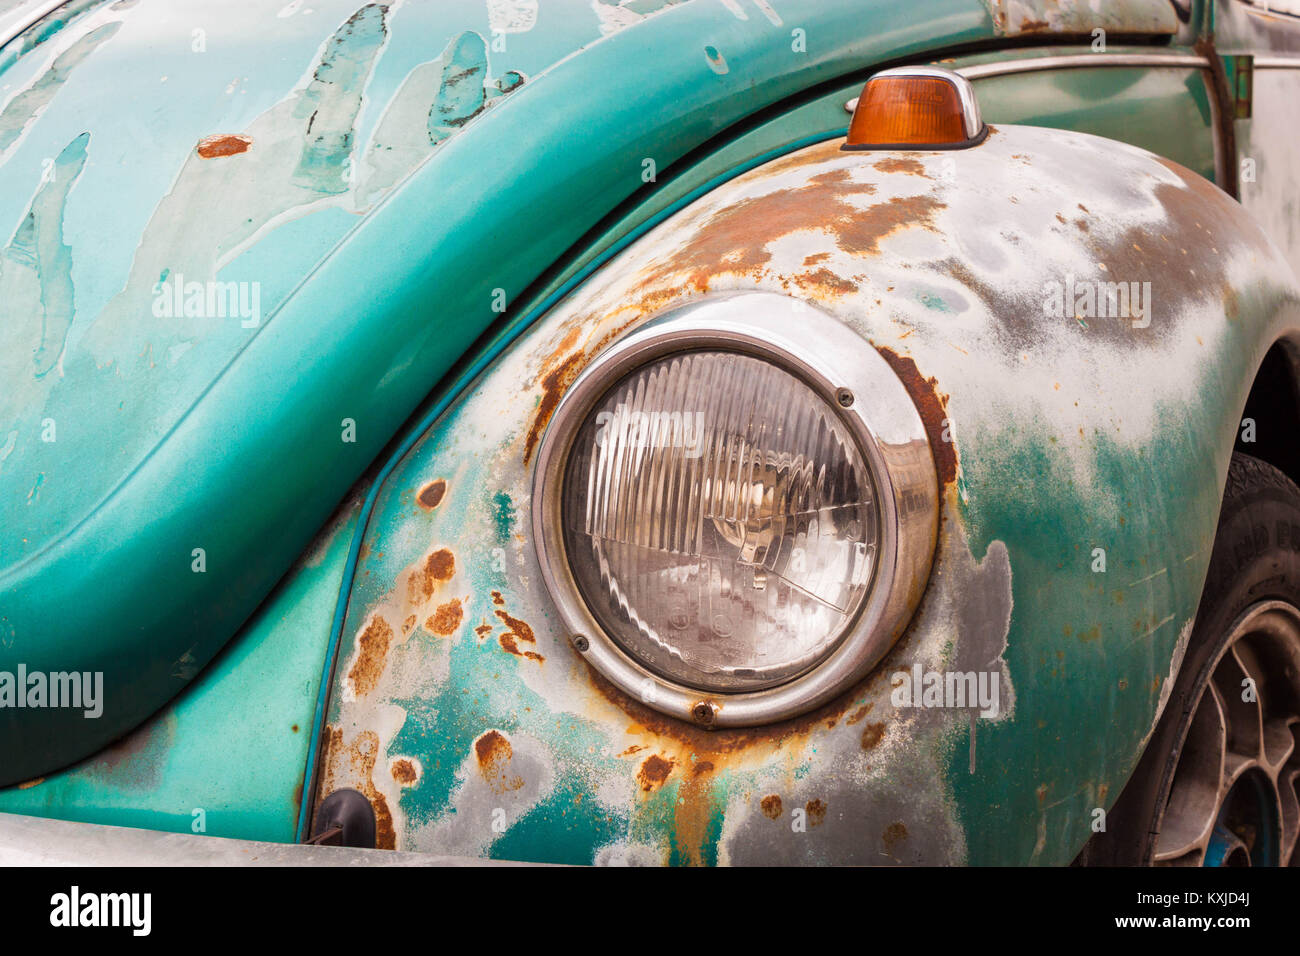 Warsaw, Poland - February 23, 2017: Old vintage car bumper with headlight closeup. Turquoise peeled paint and rusty metal. Antique oldtimer Stock Photo